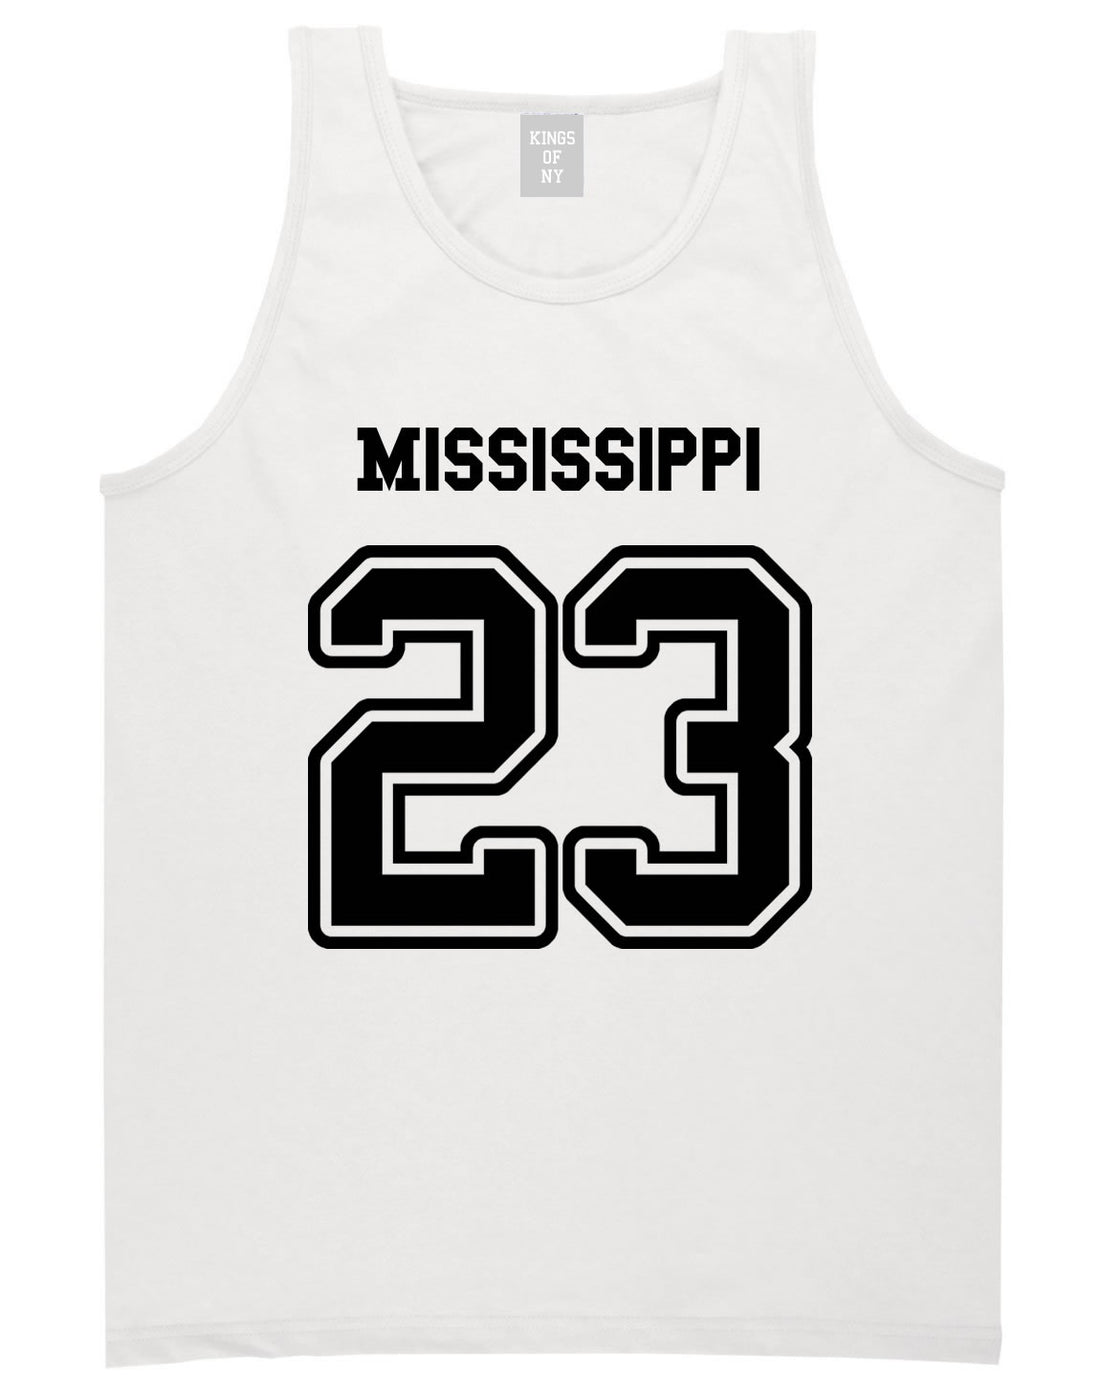 Sport Style Mississippi 23 Team State Jersey Mens Tank Top By Kings Of NY